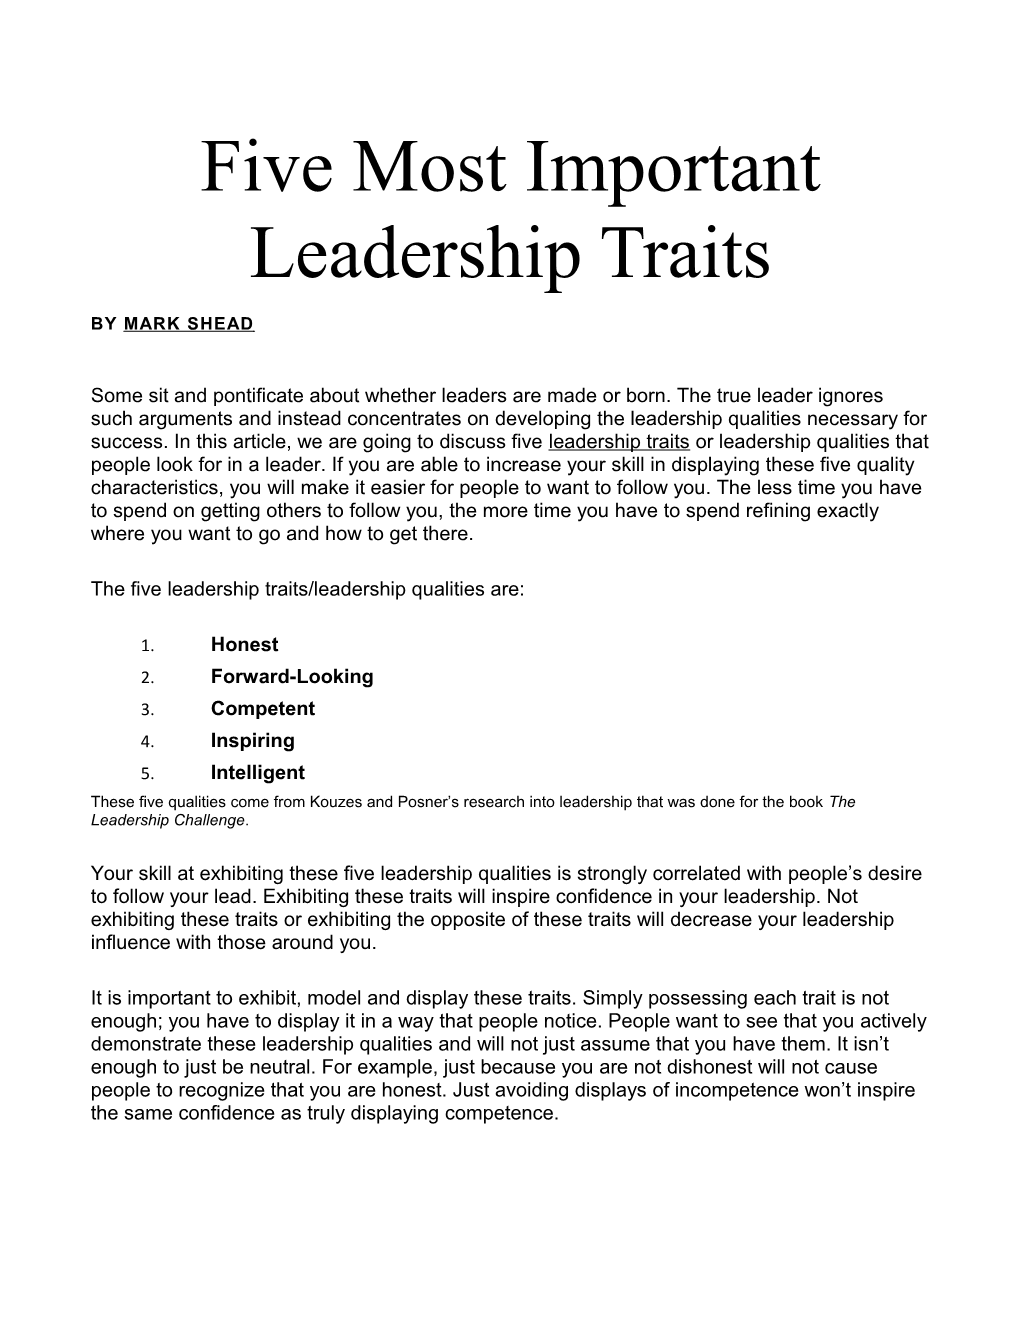 Five Most Important Leadership Traits